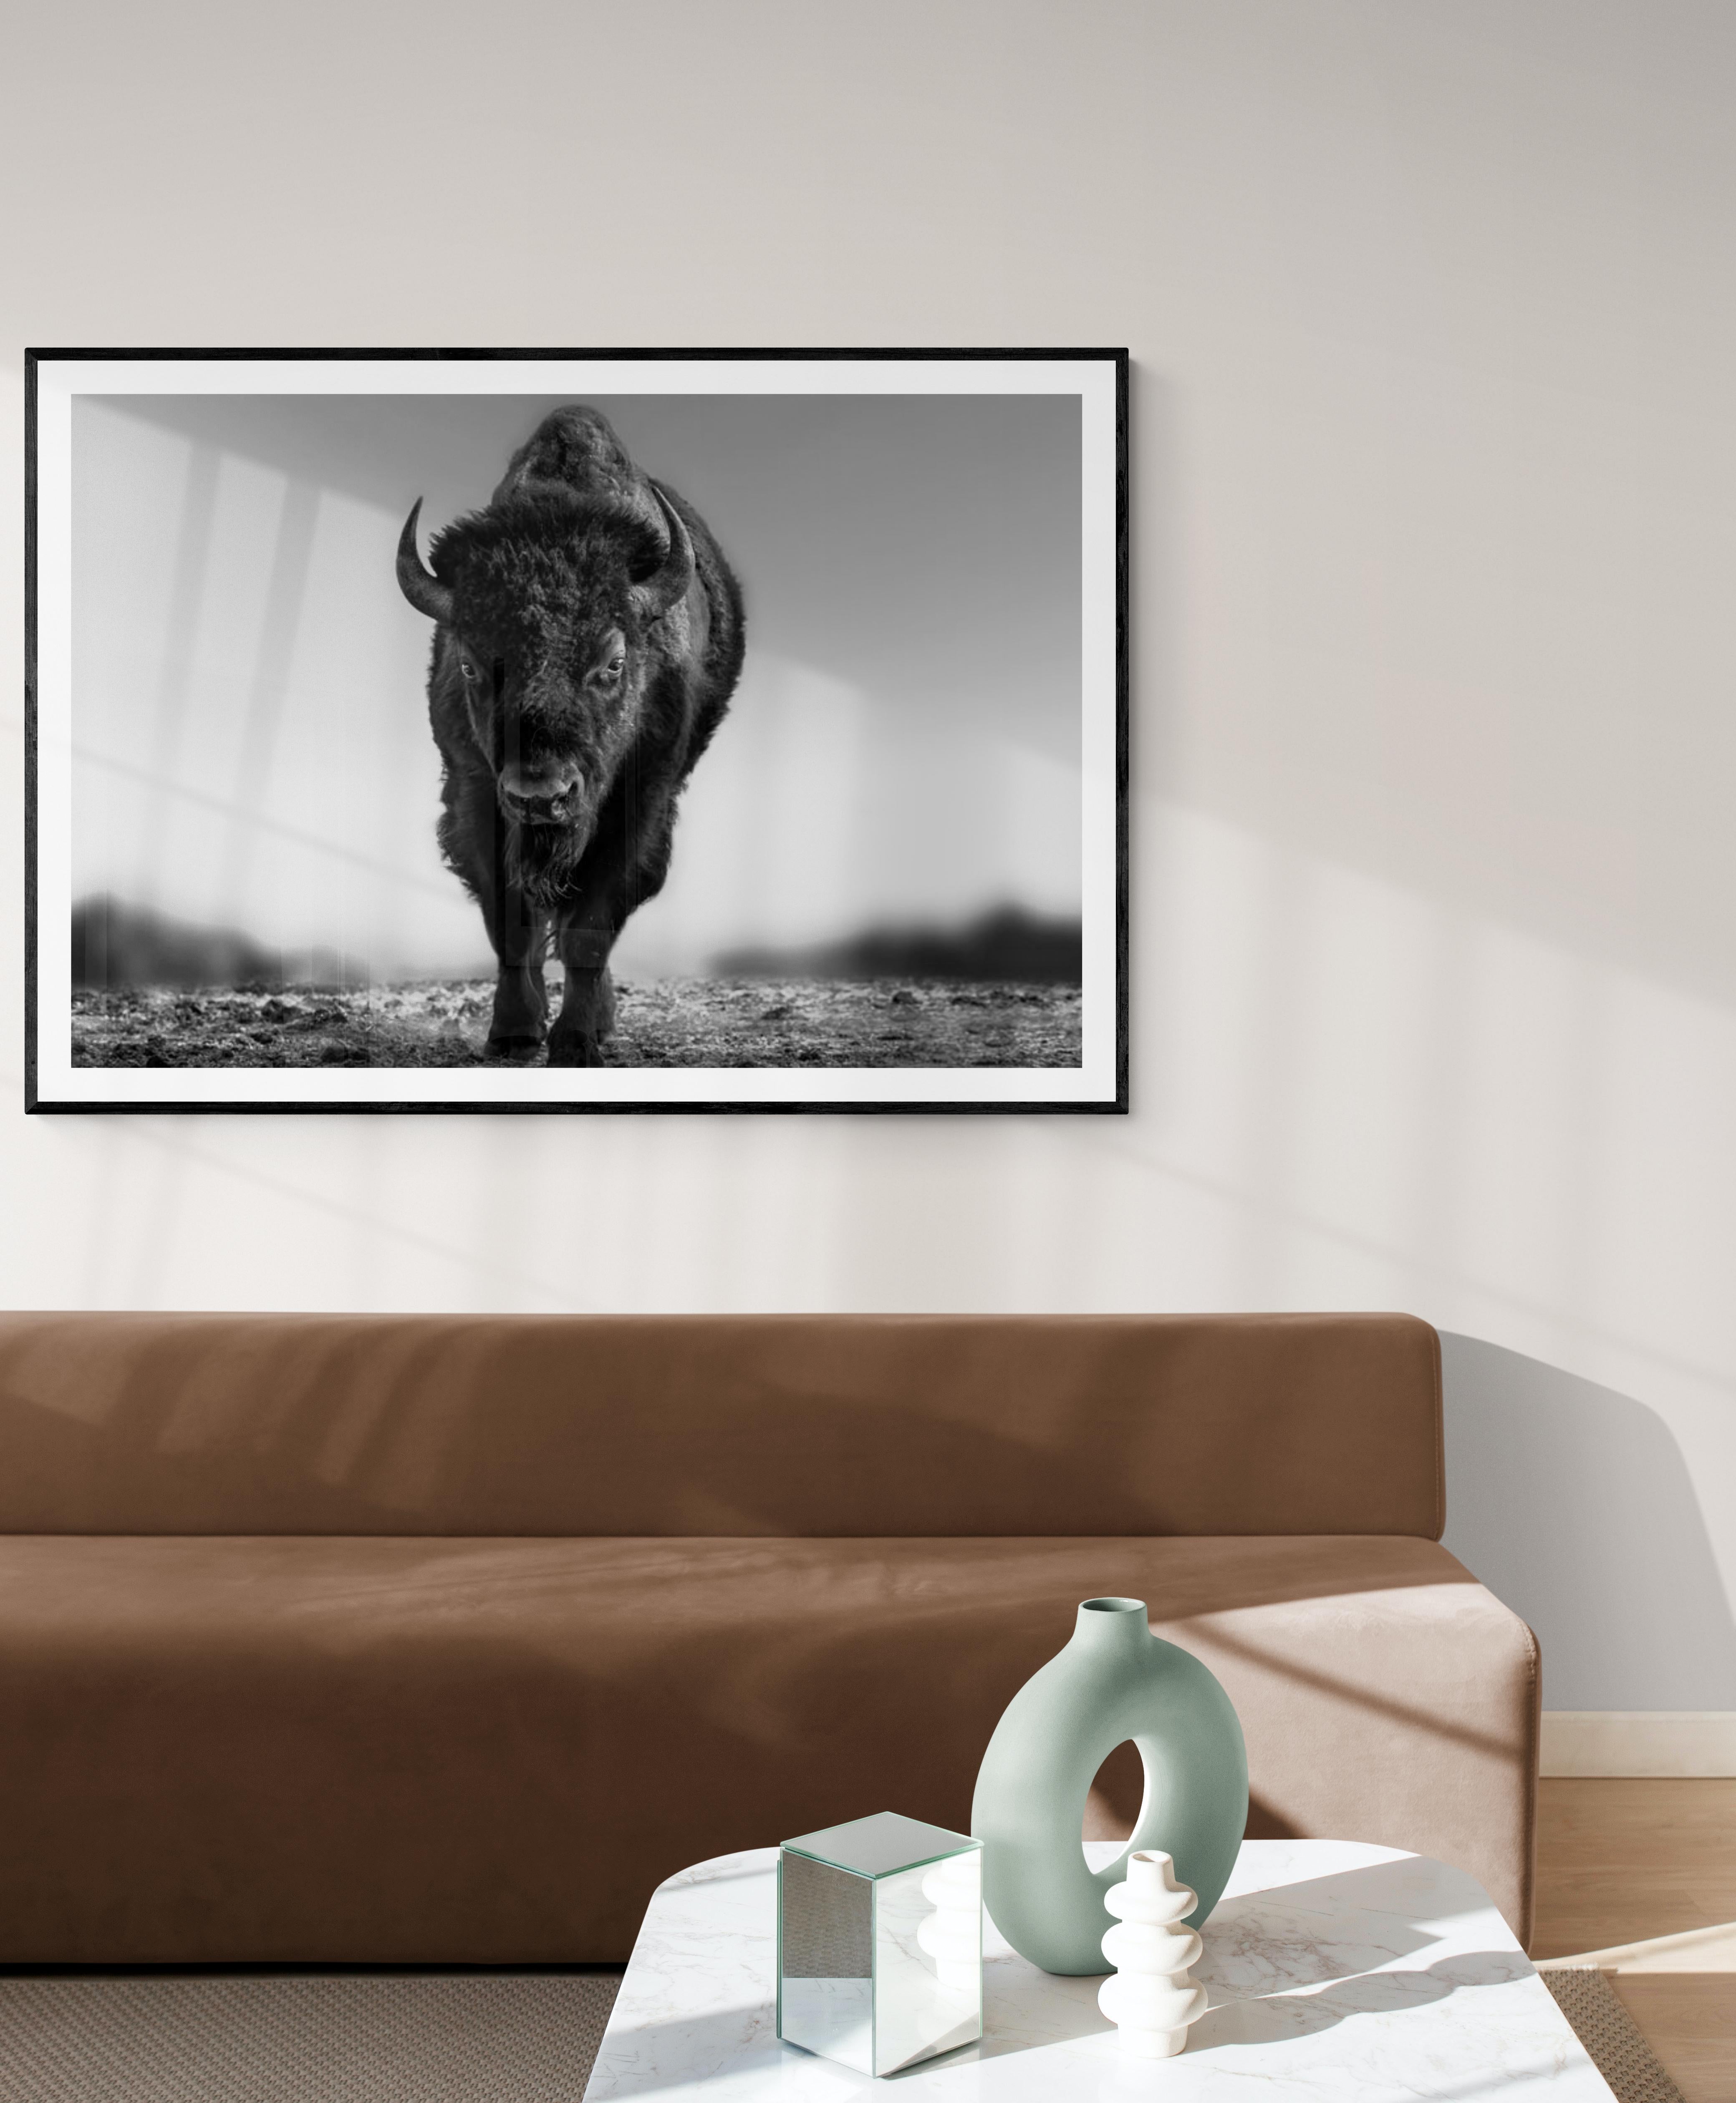 This is a contemporary photograph of an American Bison.  
50x60 
Unsinged print
Printed on archival paper and using archival inks
Framing available. Inquire for rates.   

 Shane Russeck has built a reputation for capturing America's landscapes,